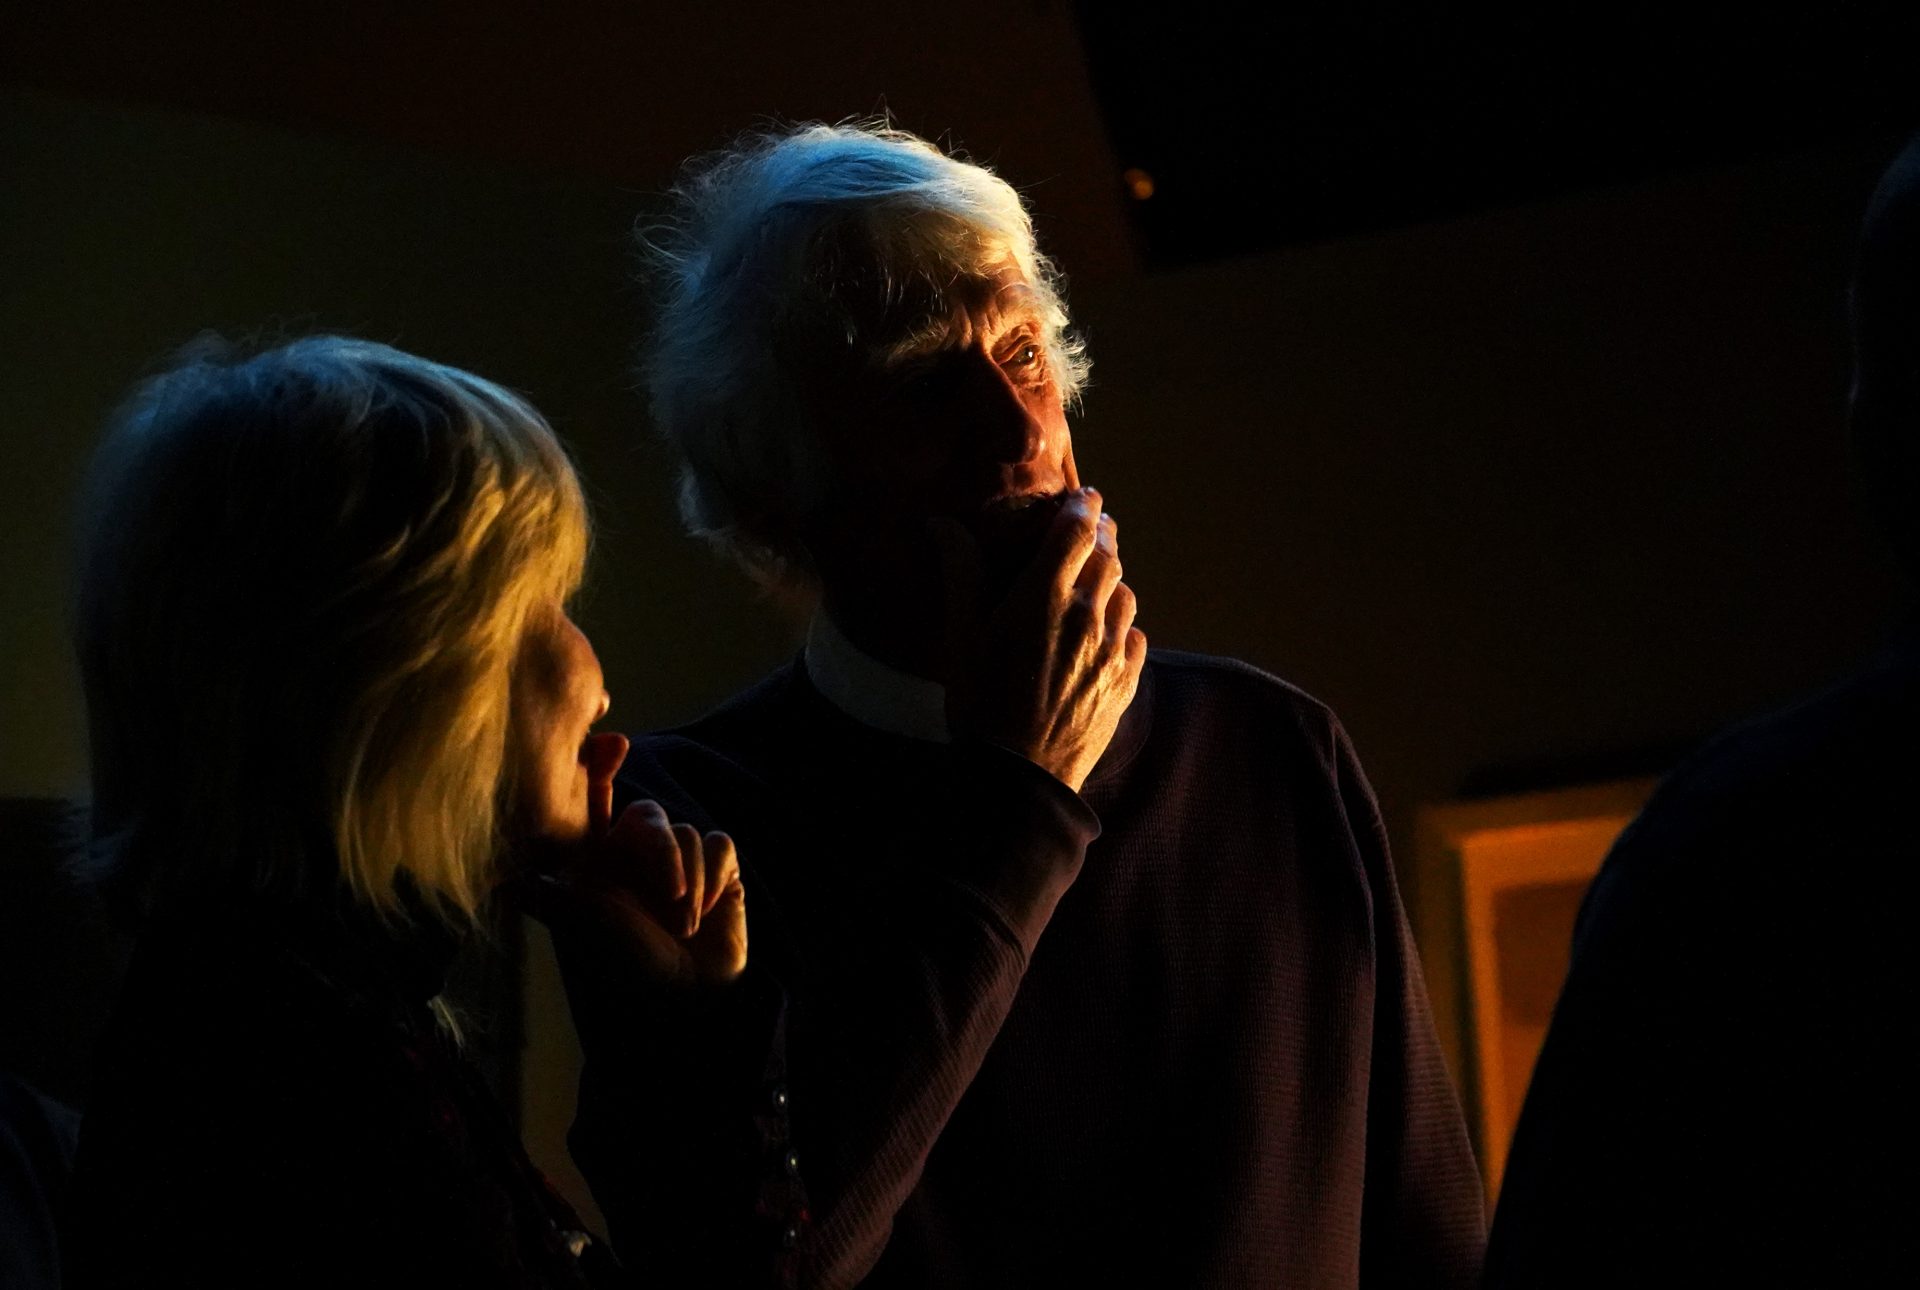 James Deakins (left) and Roger Deakins discuss lighting setups at DePauls Lighting Faces workshop at Cinespace Studios on Feb. 10, 2024. The duo worked through scenarios presented by grad students.